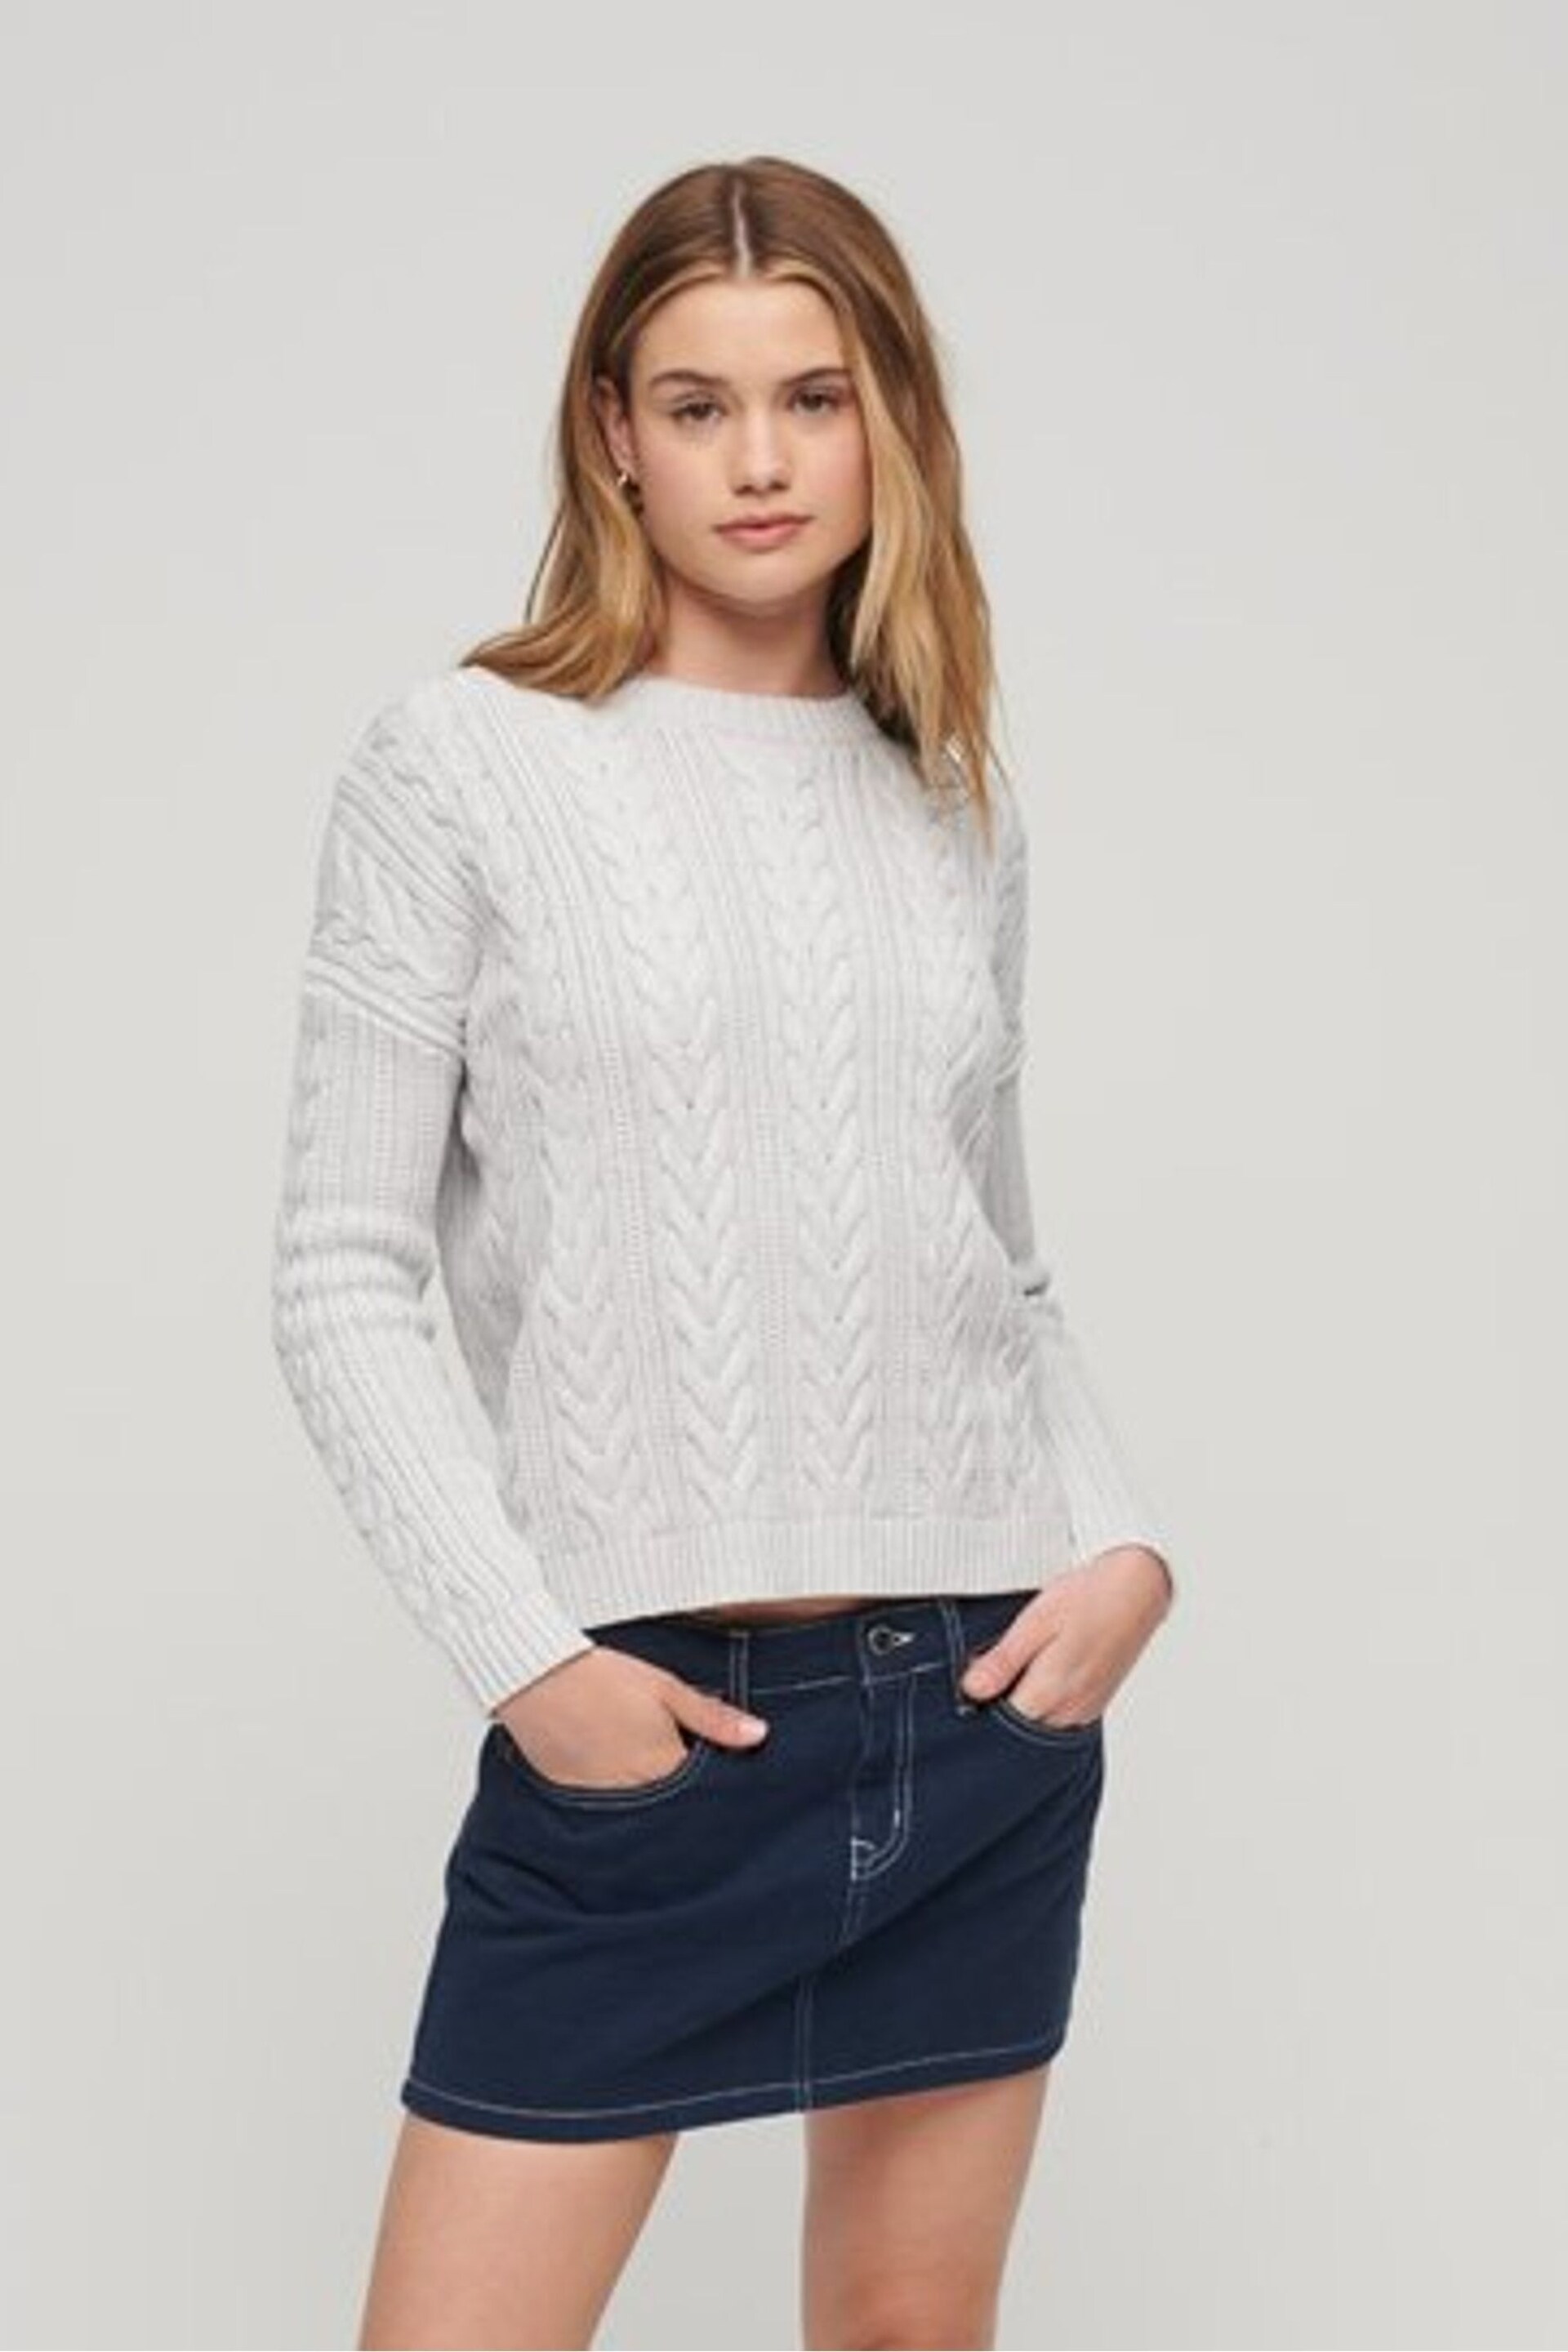 Superdry Grey Dropped Shoulder Cable Crew Jumper - Image 1 of 6